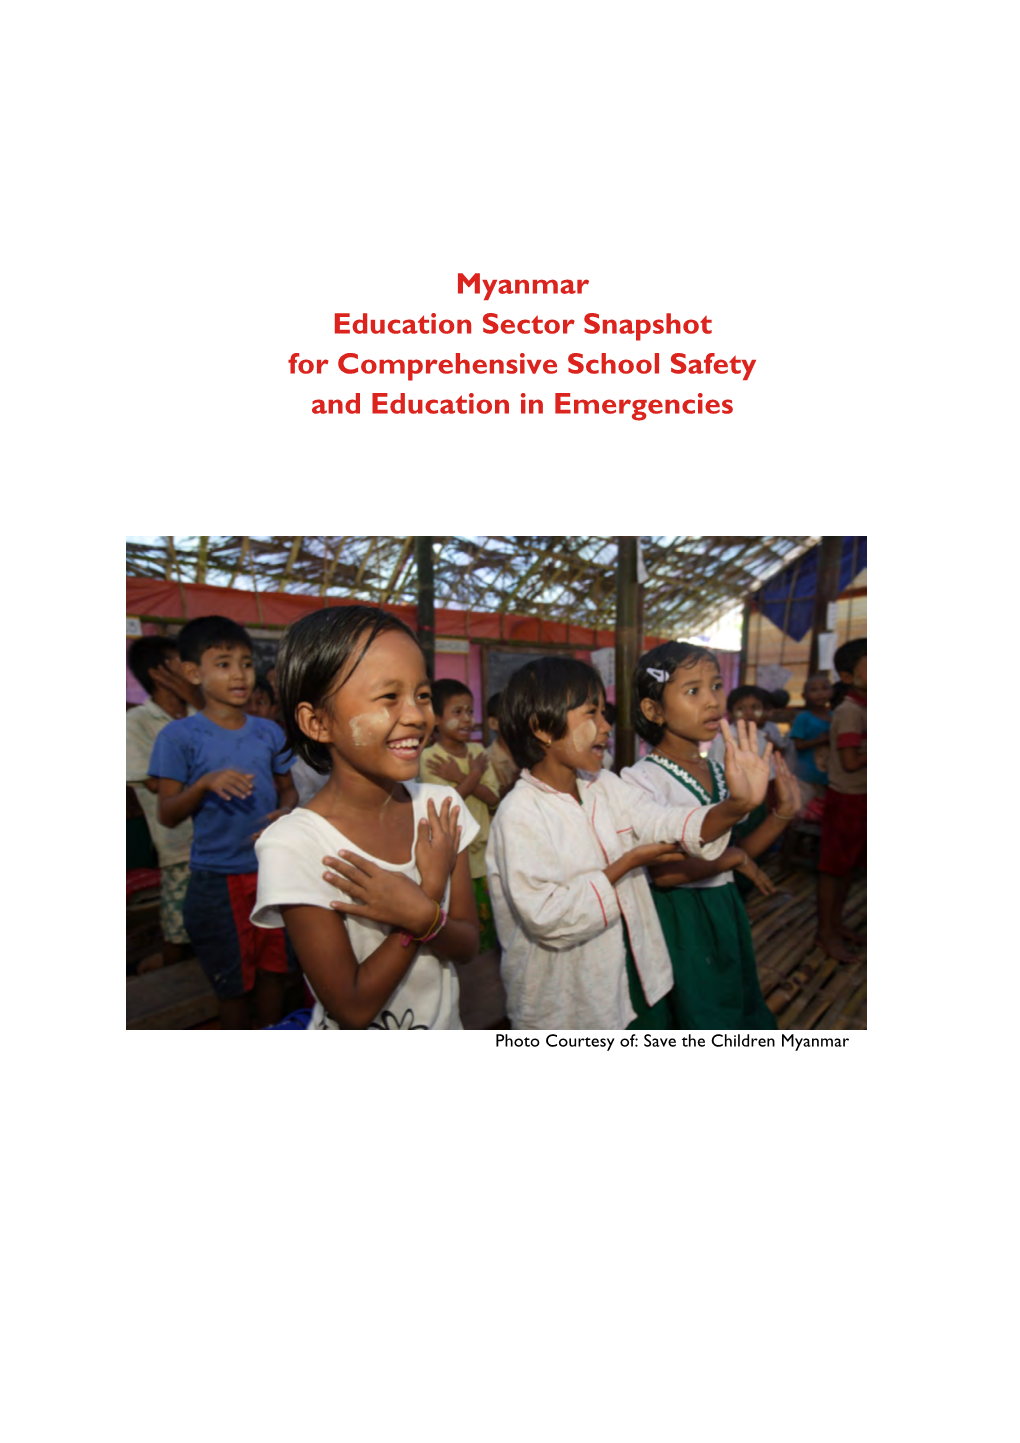 Myanmar Education Sector Snapshot for Comprehensive School Safety and Education in Emergencies